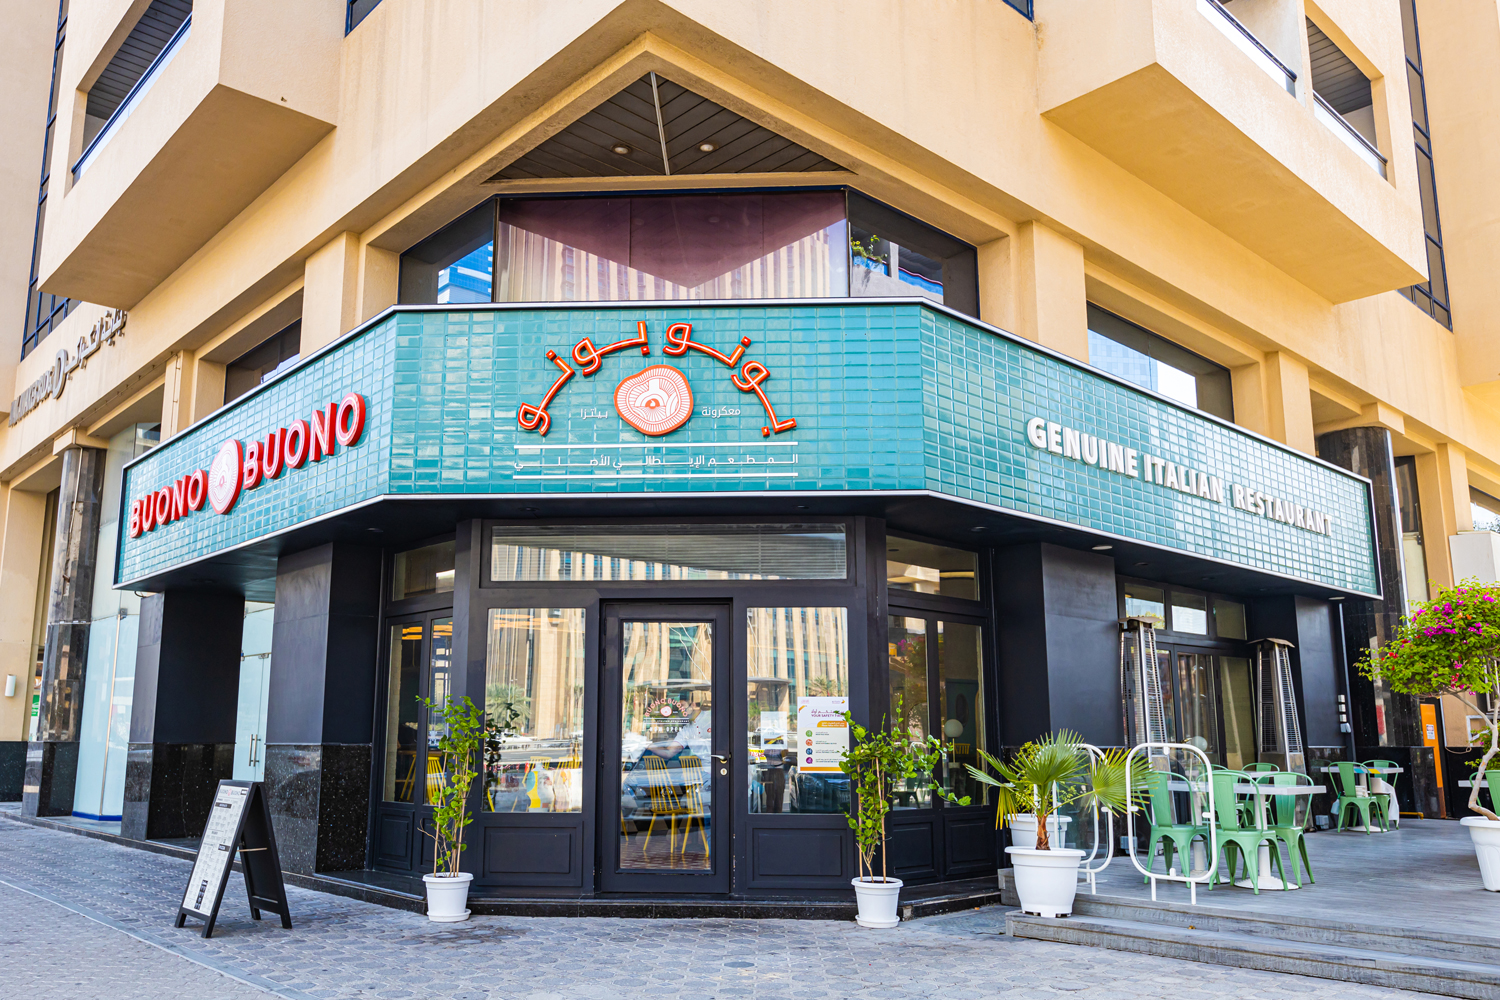 Italian Restaurant Buono Buono Launches With Two Locations In Dubai Caterer Middle East